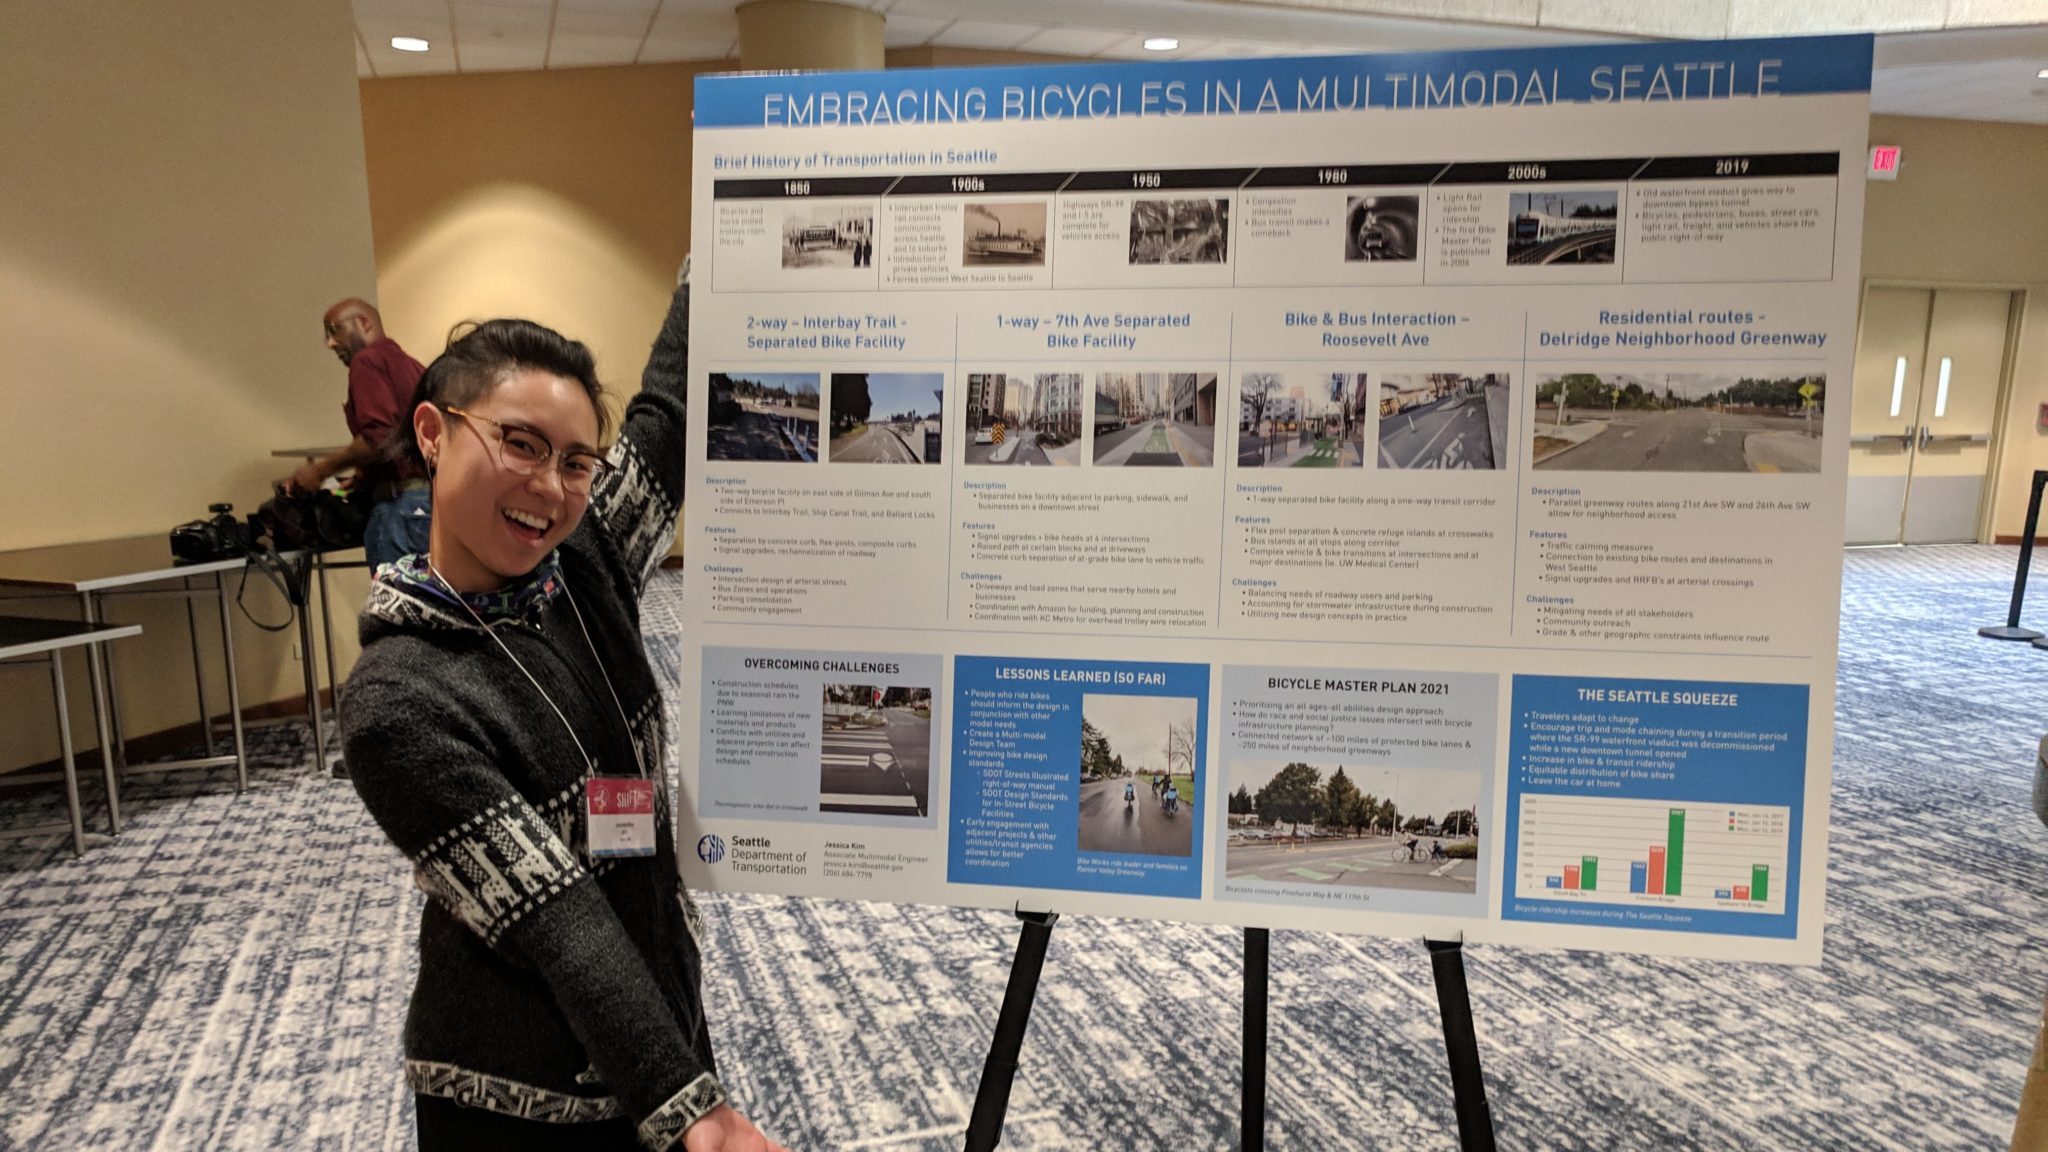 Jess at National Bike Summit: Here Jess presents a poster showcasing various multimodal infrastructure throughout Seattle at the National Bike Summit in Washington D.C. in March of 2019.